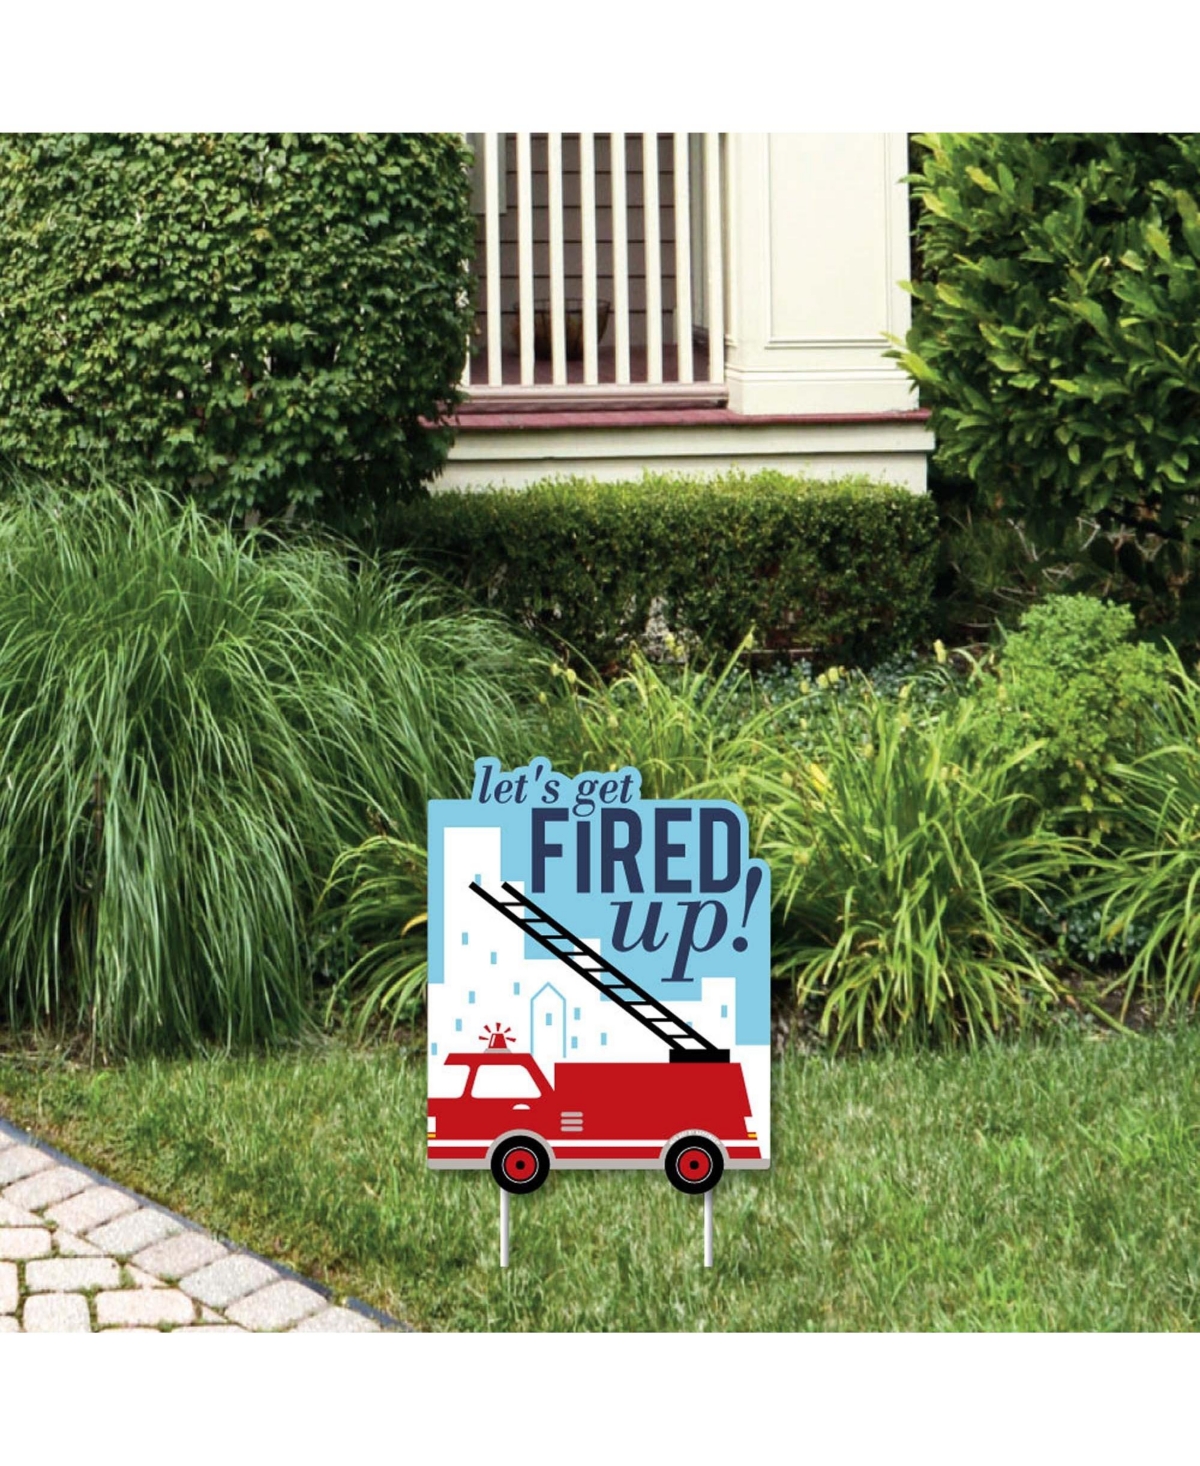 Fired Up Fire Truck - Outdoor Lawn Sign - Firefighter Party Yard Sign - 1 Pc